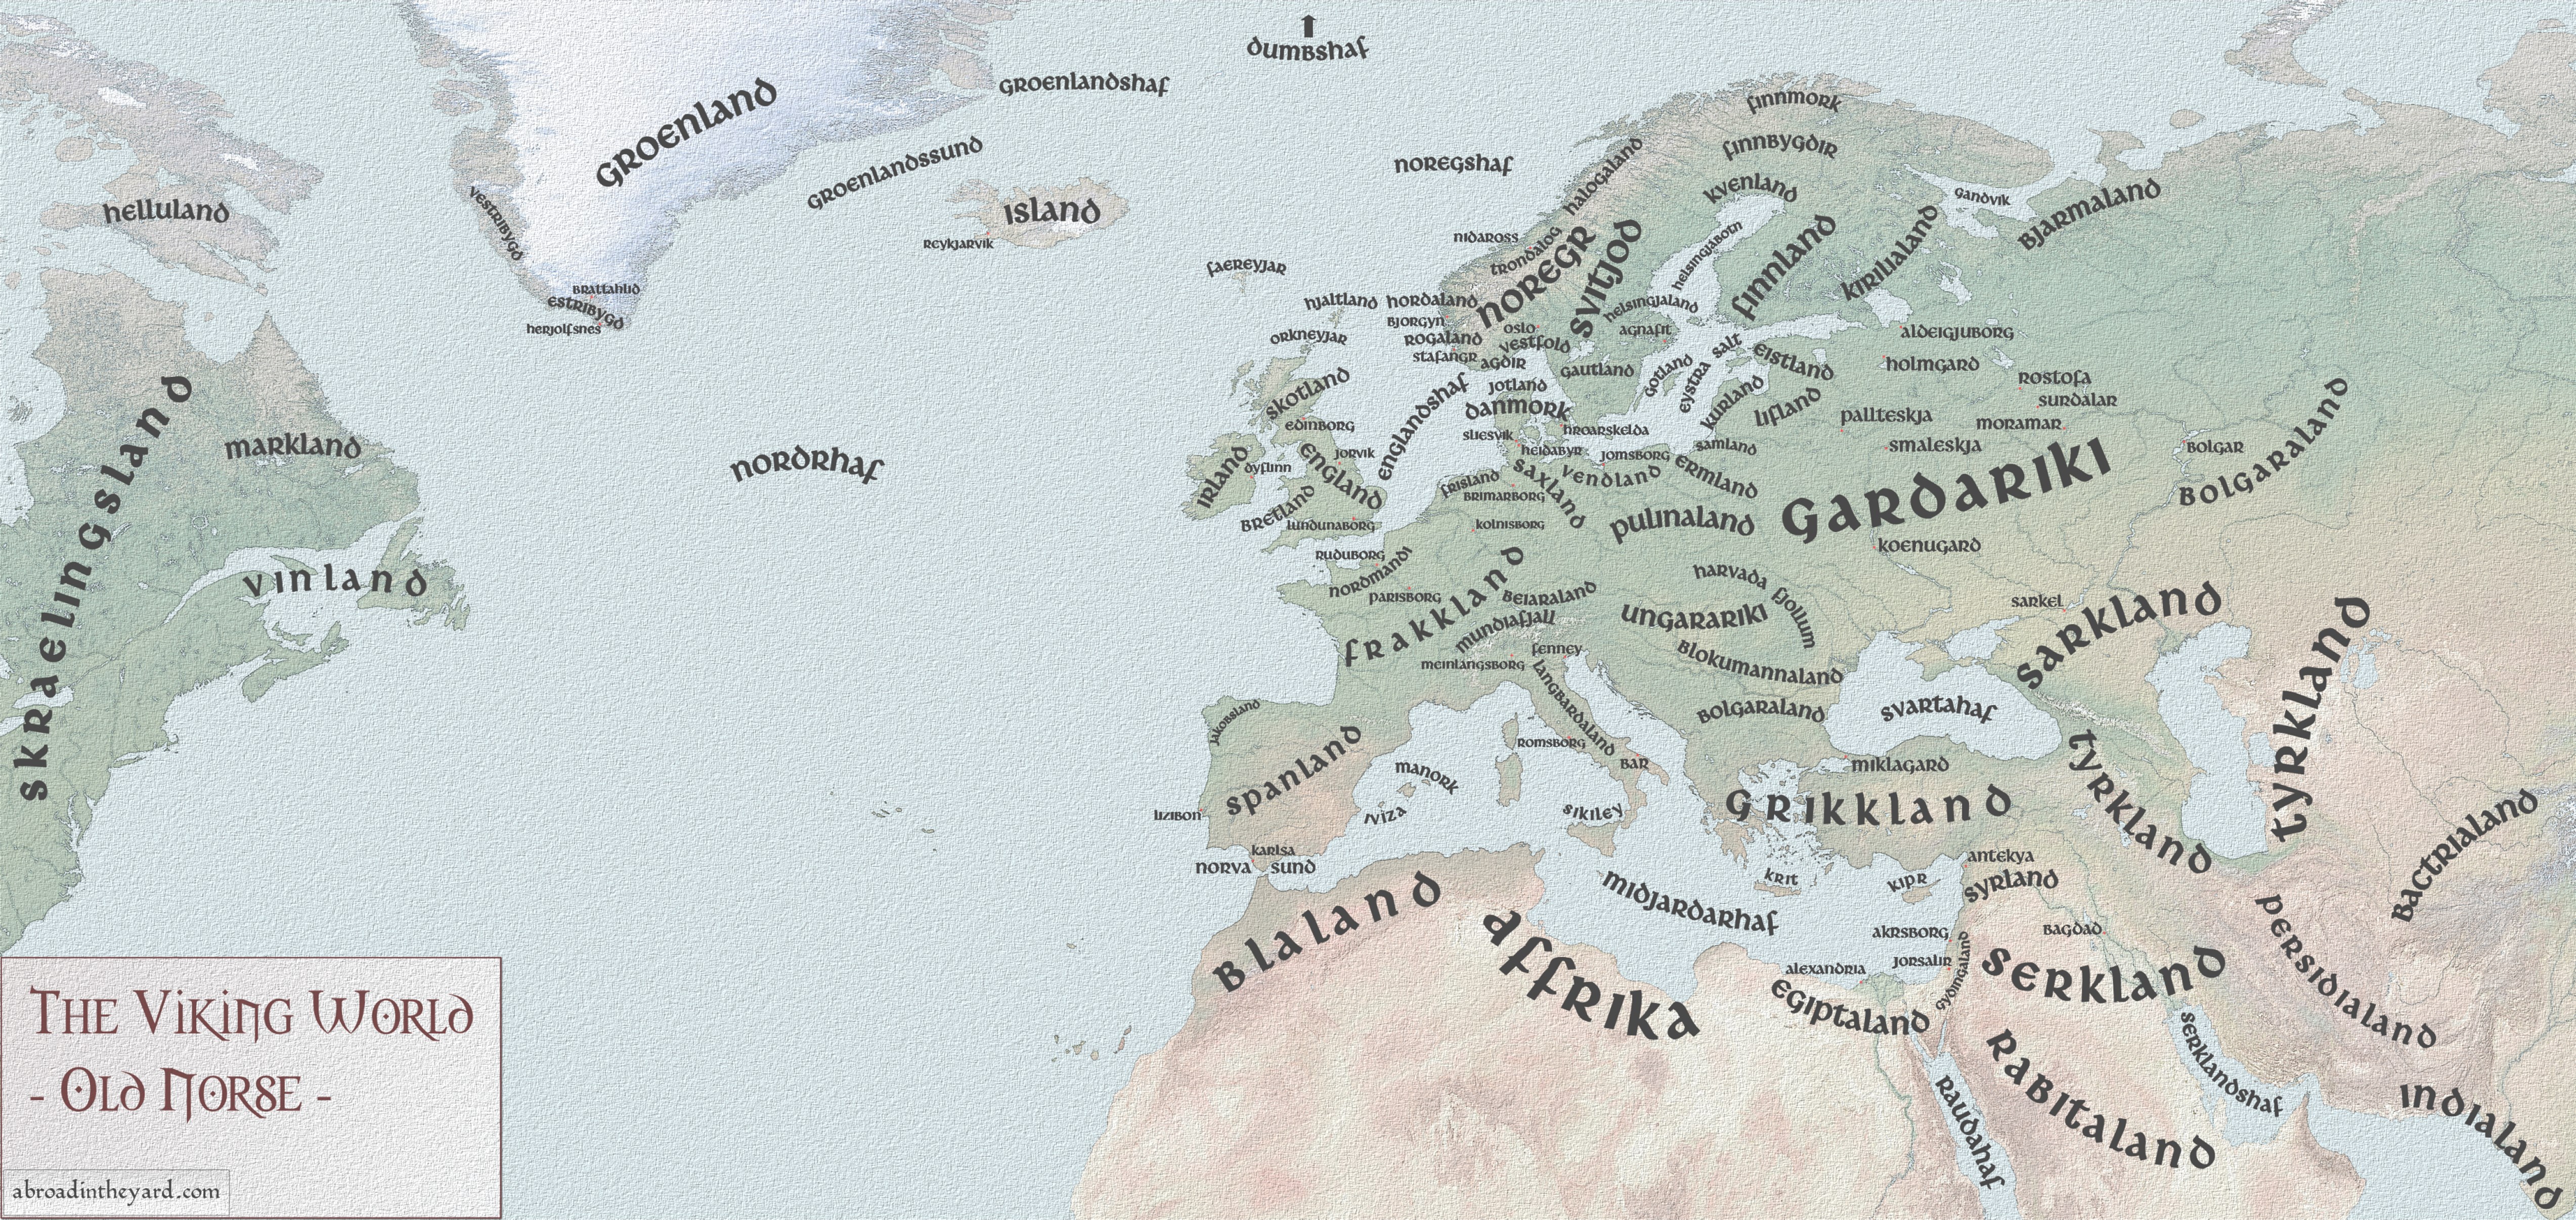 Map of the known world to the Norsemen depicting place names in Old Norse. Image source: www.abroadintheyard.com